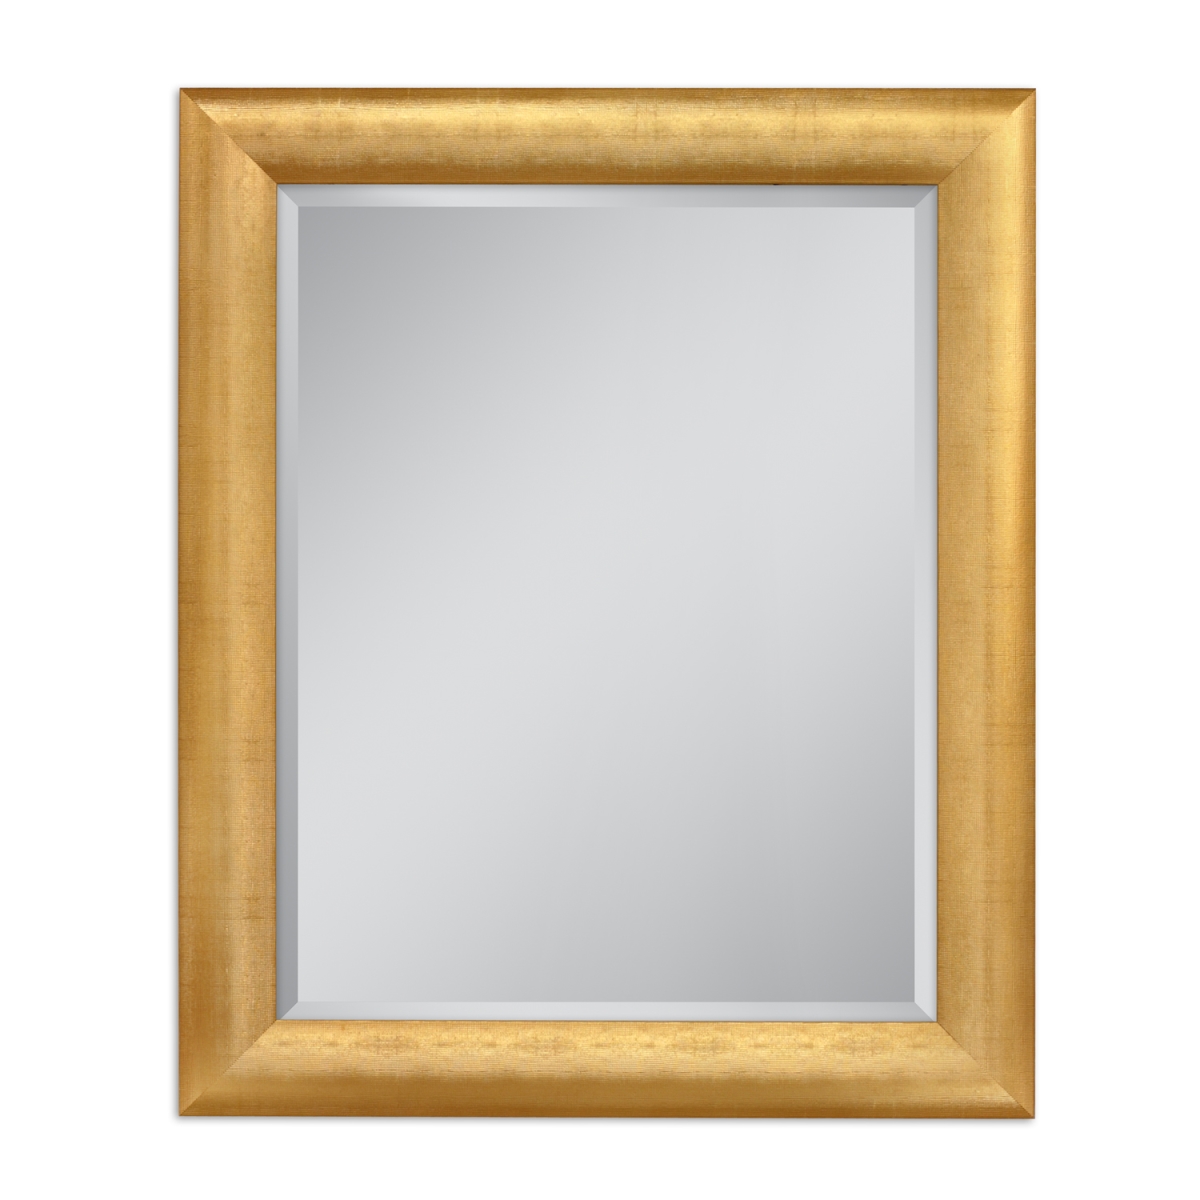 Head West 8112 28 X 34 In. Pave Weave Wall Mirror Gold